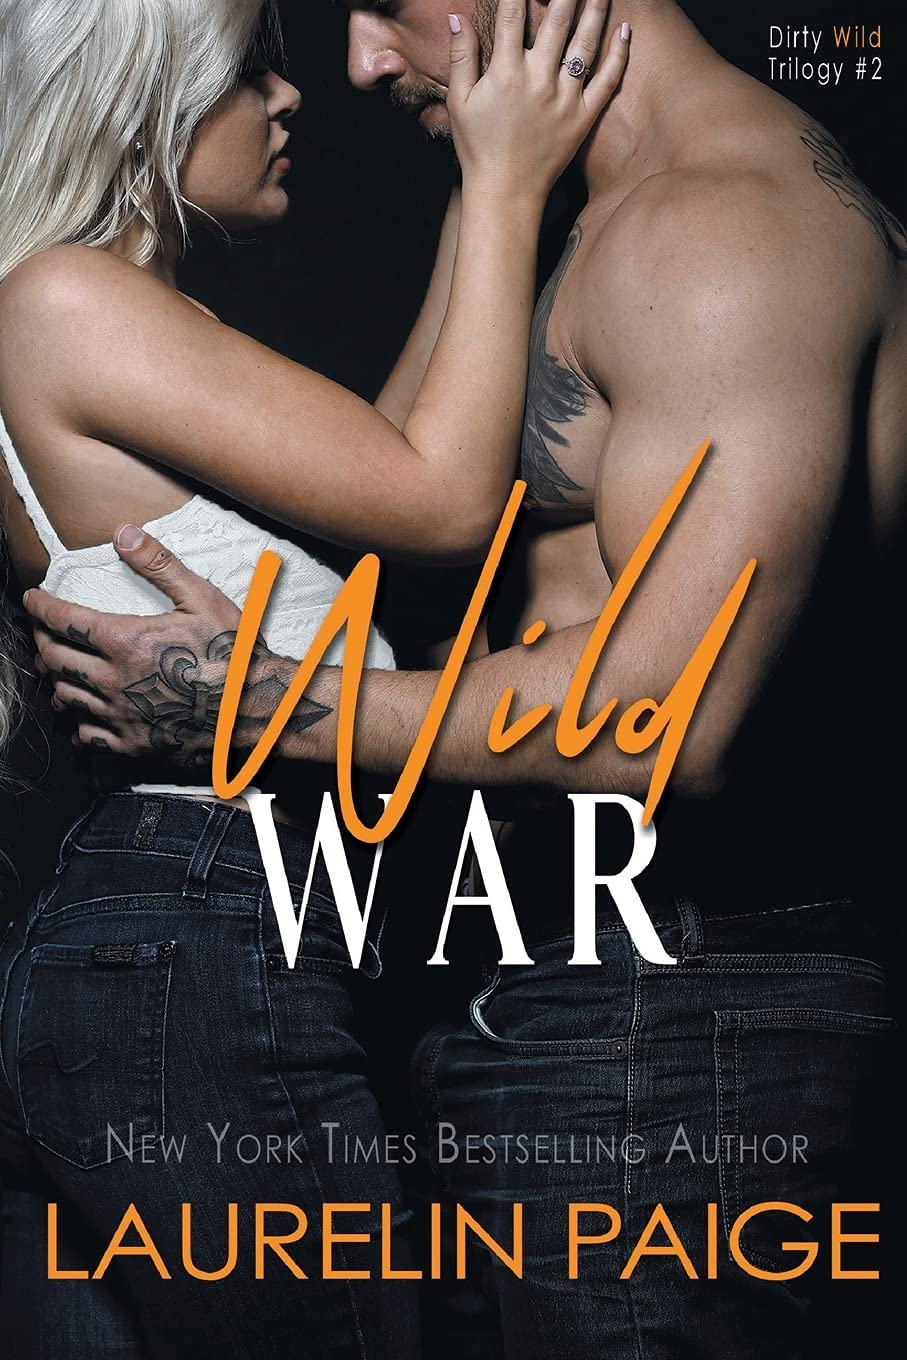 Dirty Wild Trilogy by Laurelin Paige